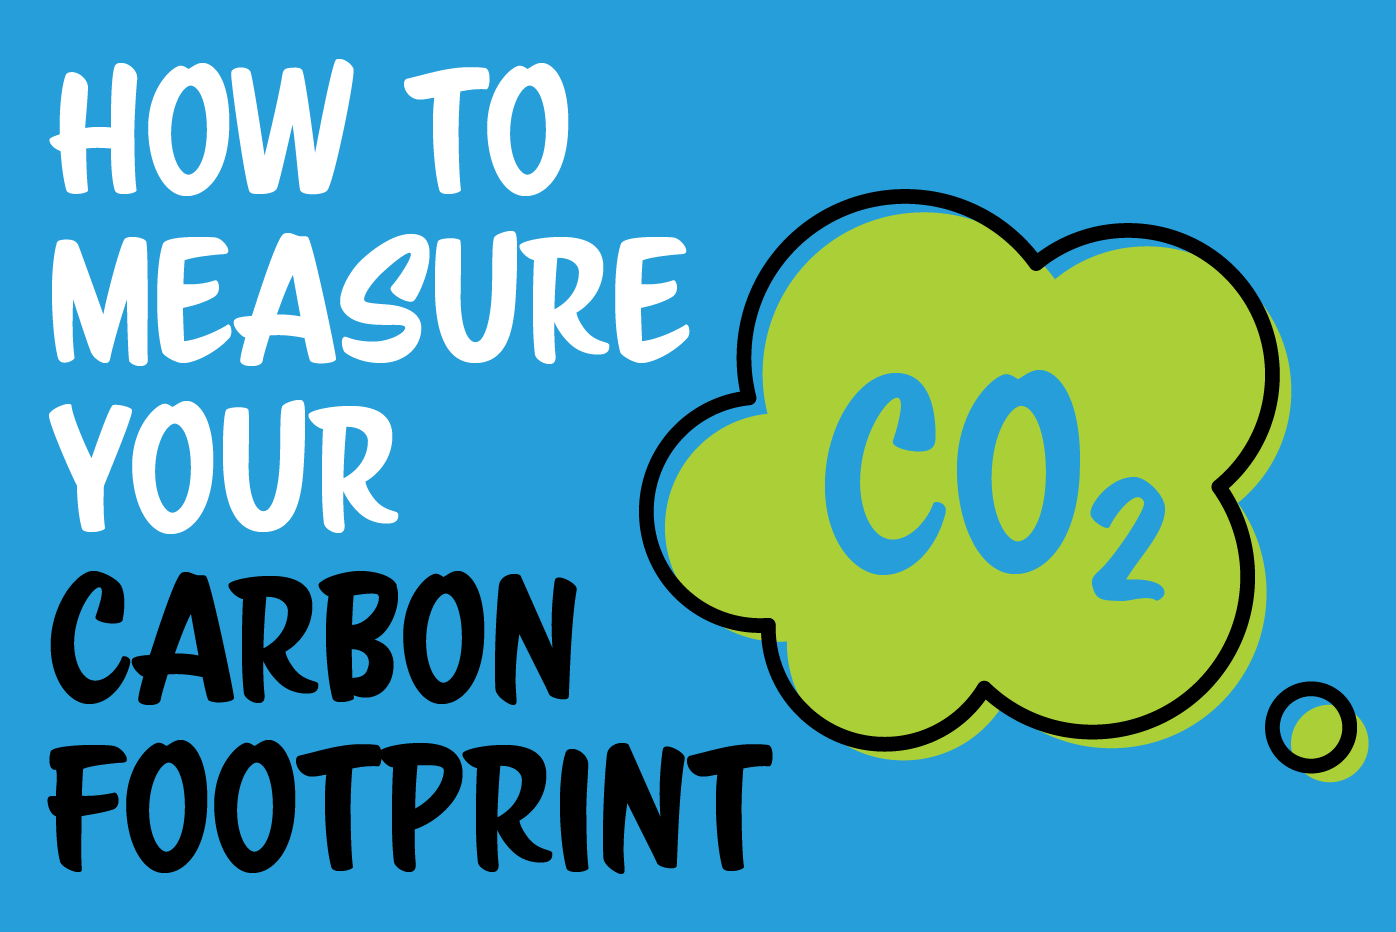 Promotional image to encourage people to measure their carbon footprint